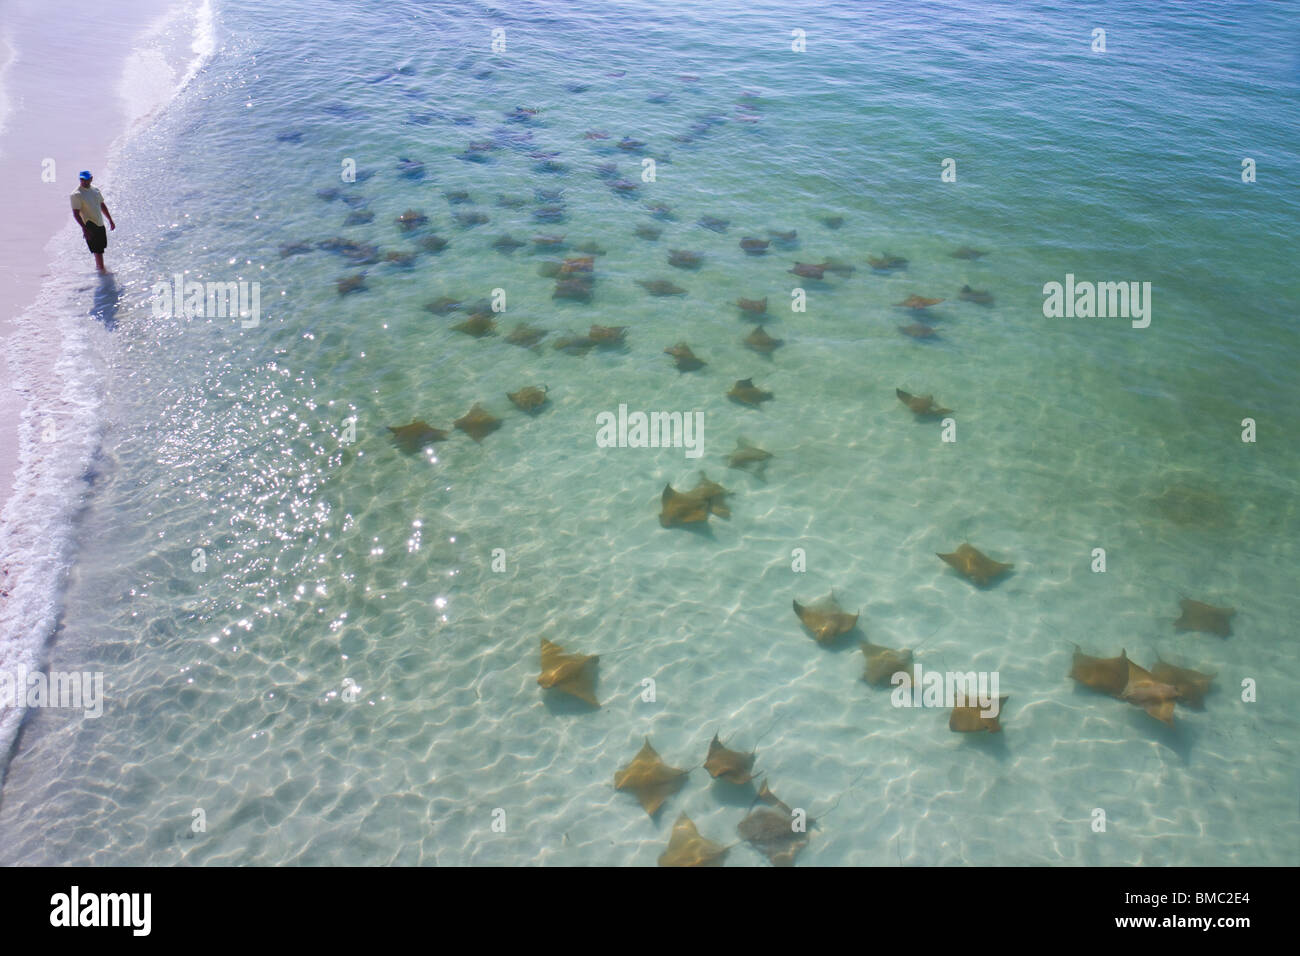 A run of common eagle rays (Myliobatis aquila) along the coast of the Gulf of Mexico (Florida). Stock Photo